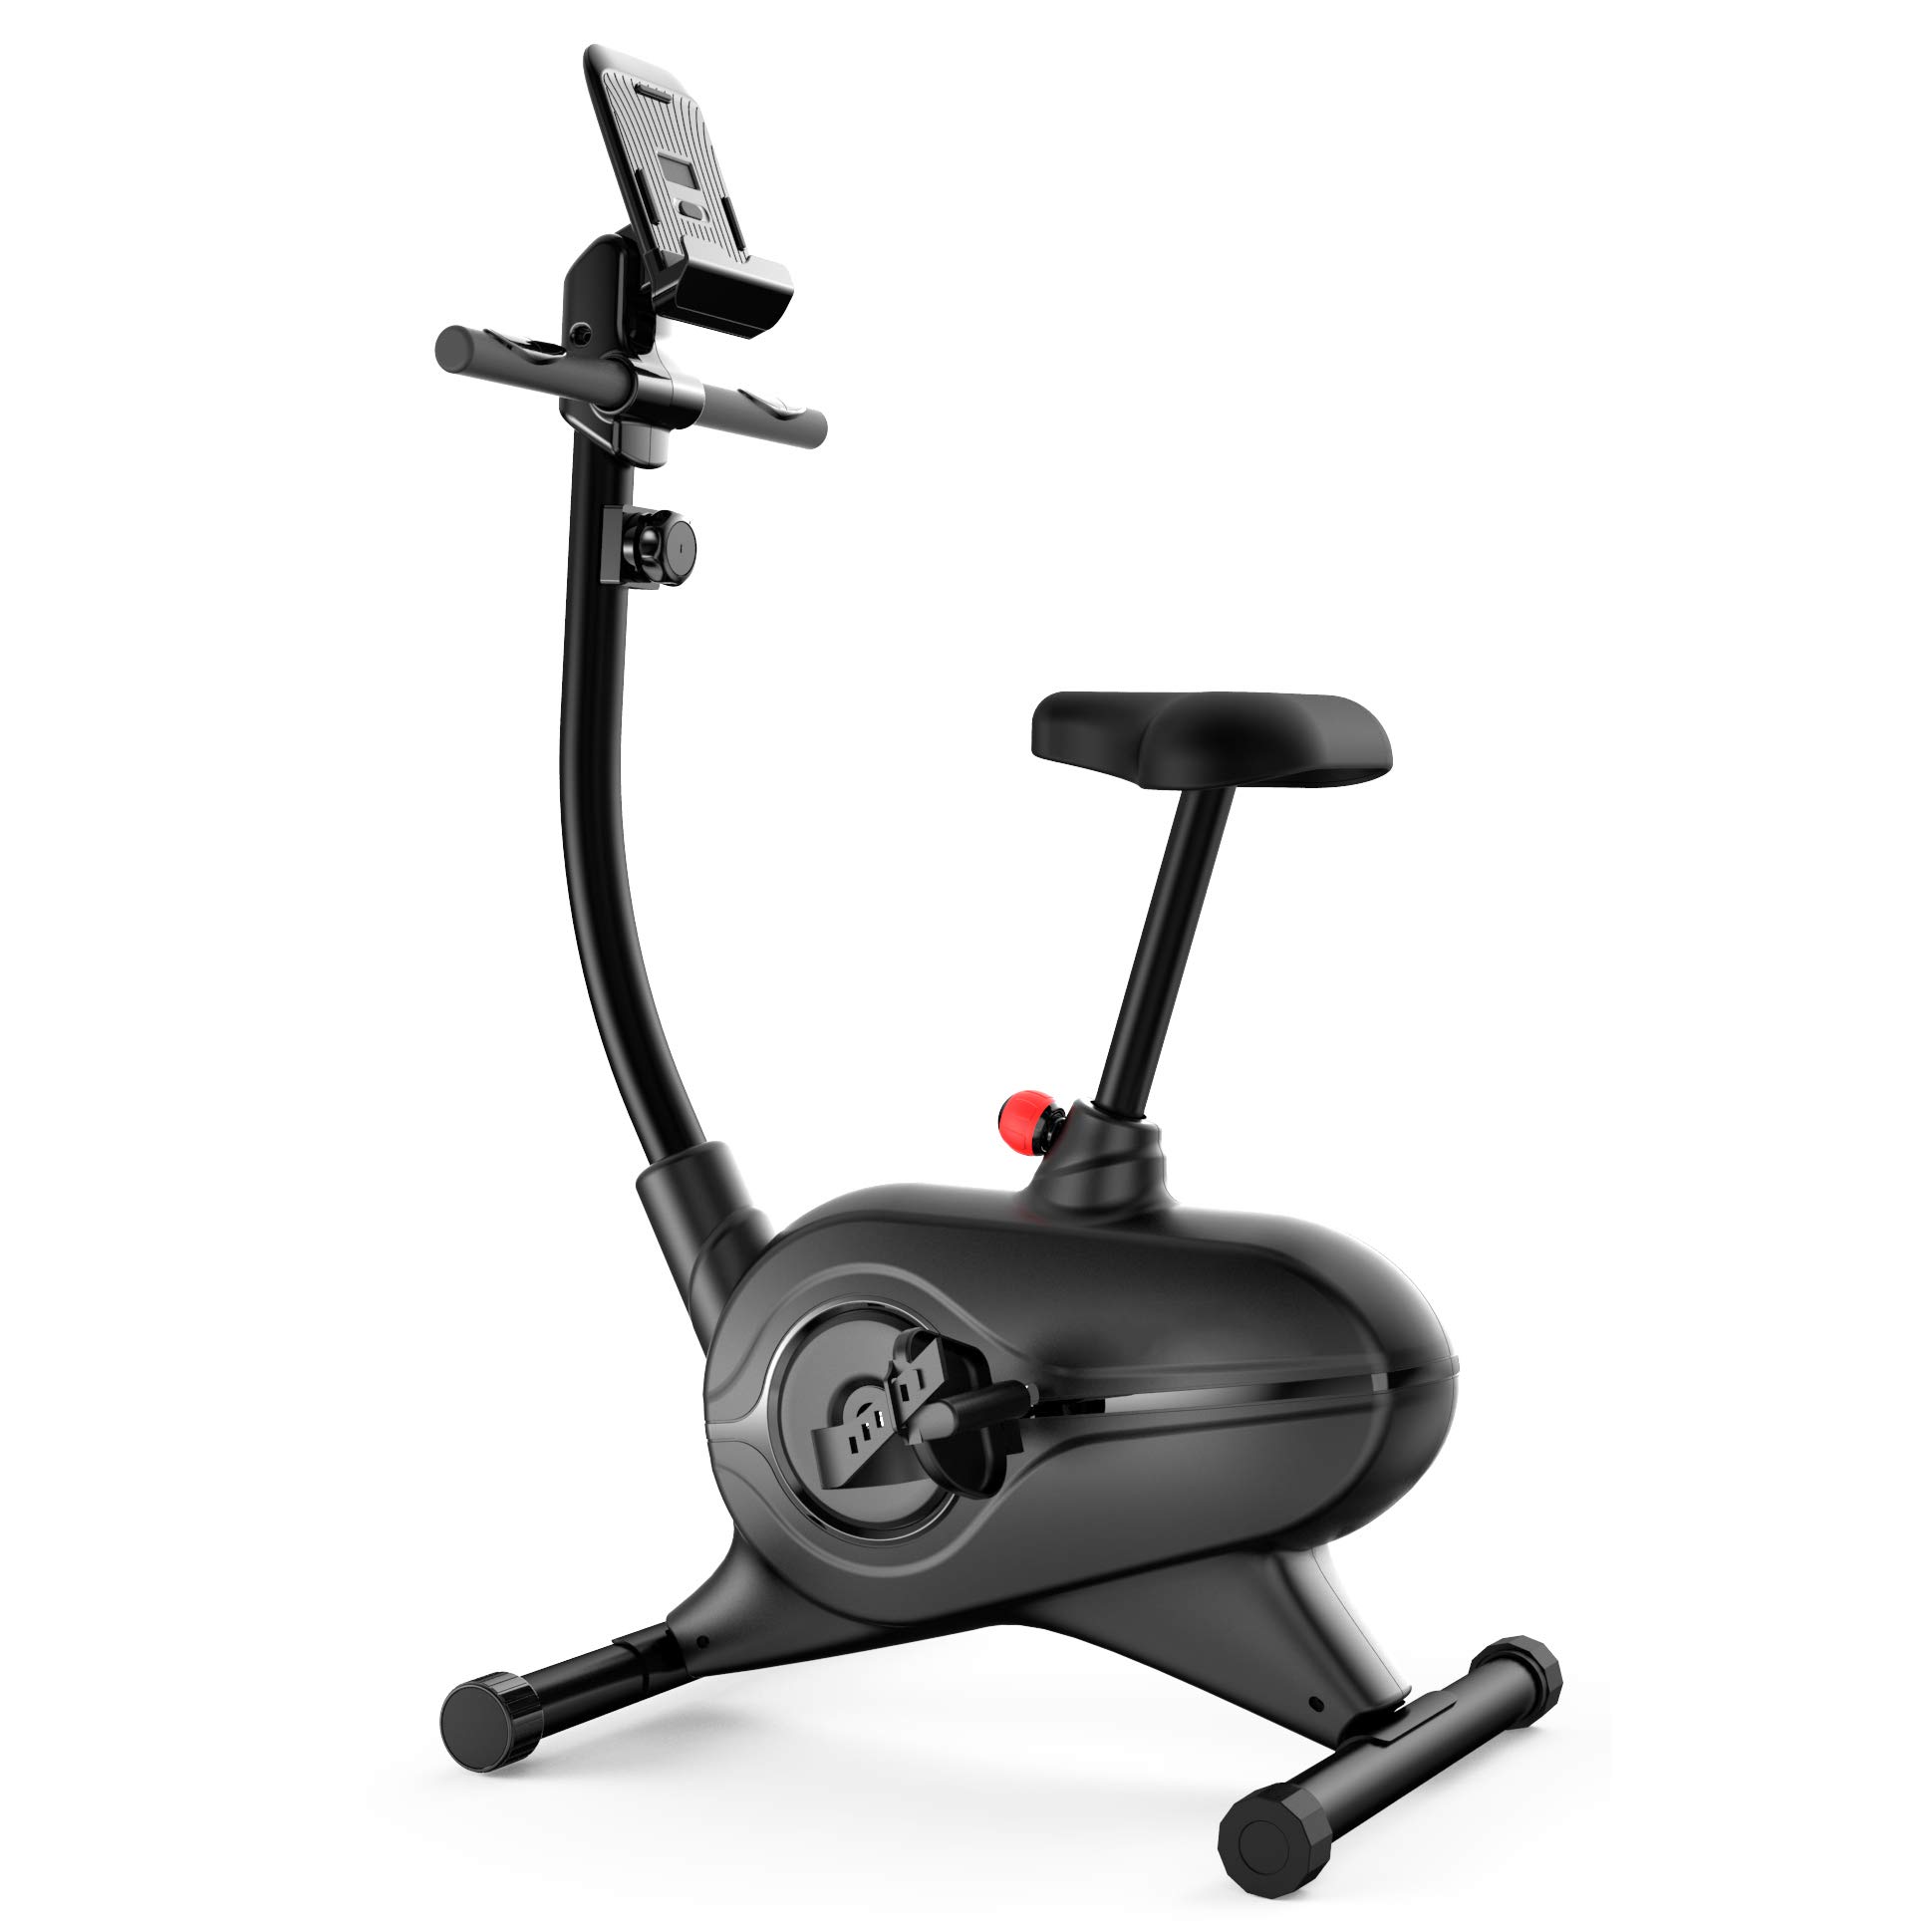 SereneLife Exercise Bike - Upright Stationary Bicycle Cardio Cycle Pedal Trainer Fitness Machine Equipment with Digital Conso